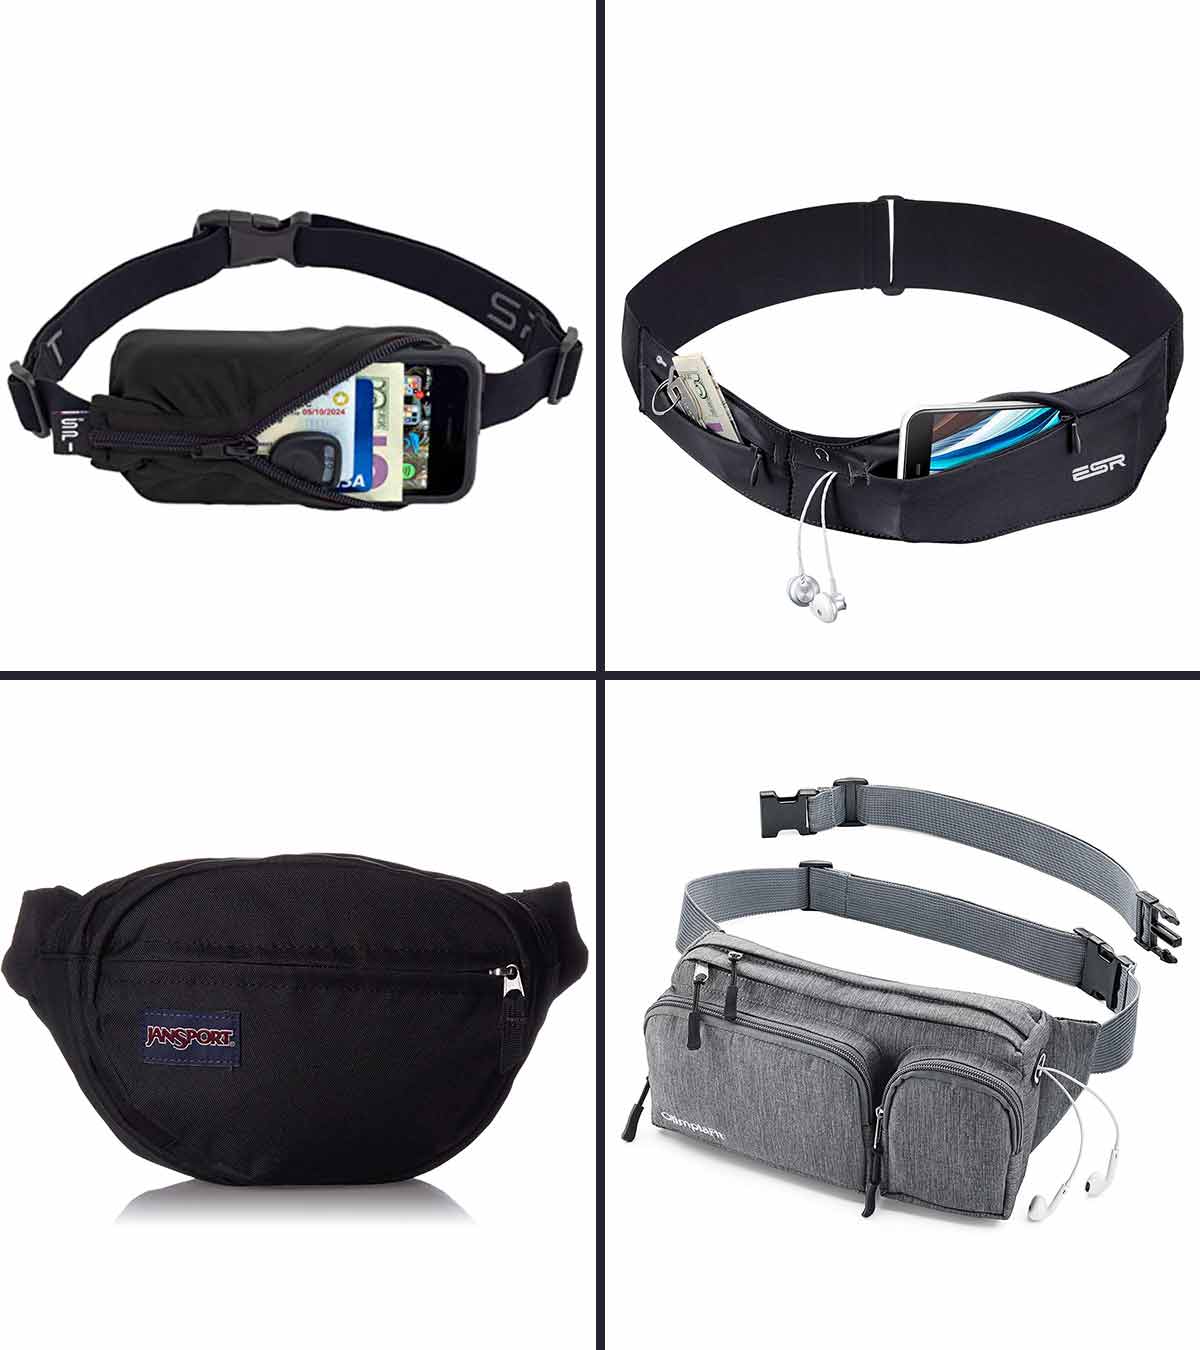 Waist Packs Money Belt Pouch Waterproof Bag with Headphone Hole and Reflective Stripe for Running Walking Outdoor Activity 